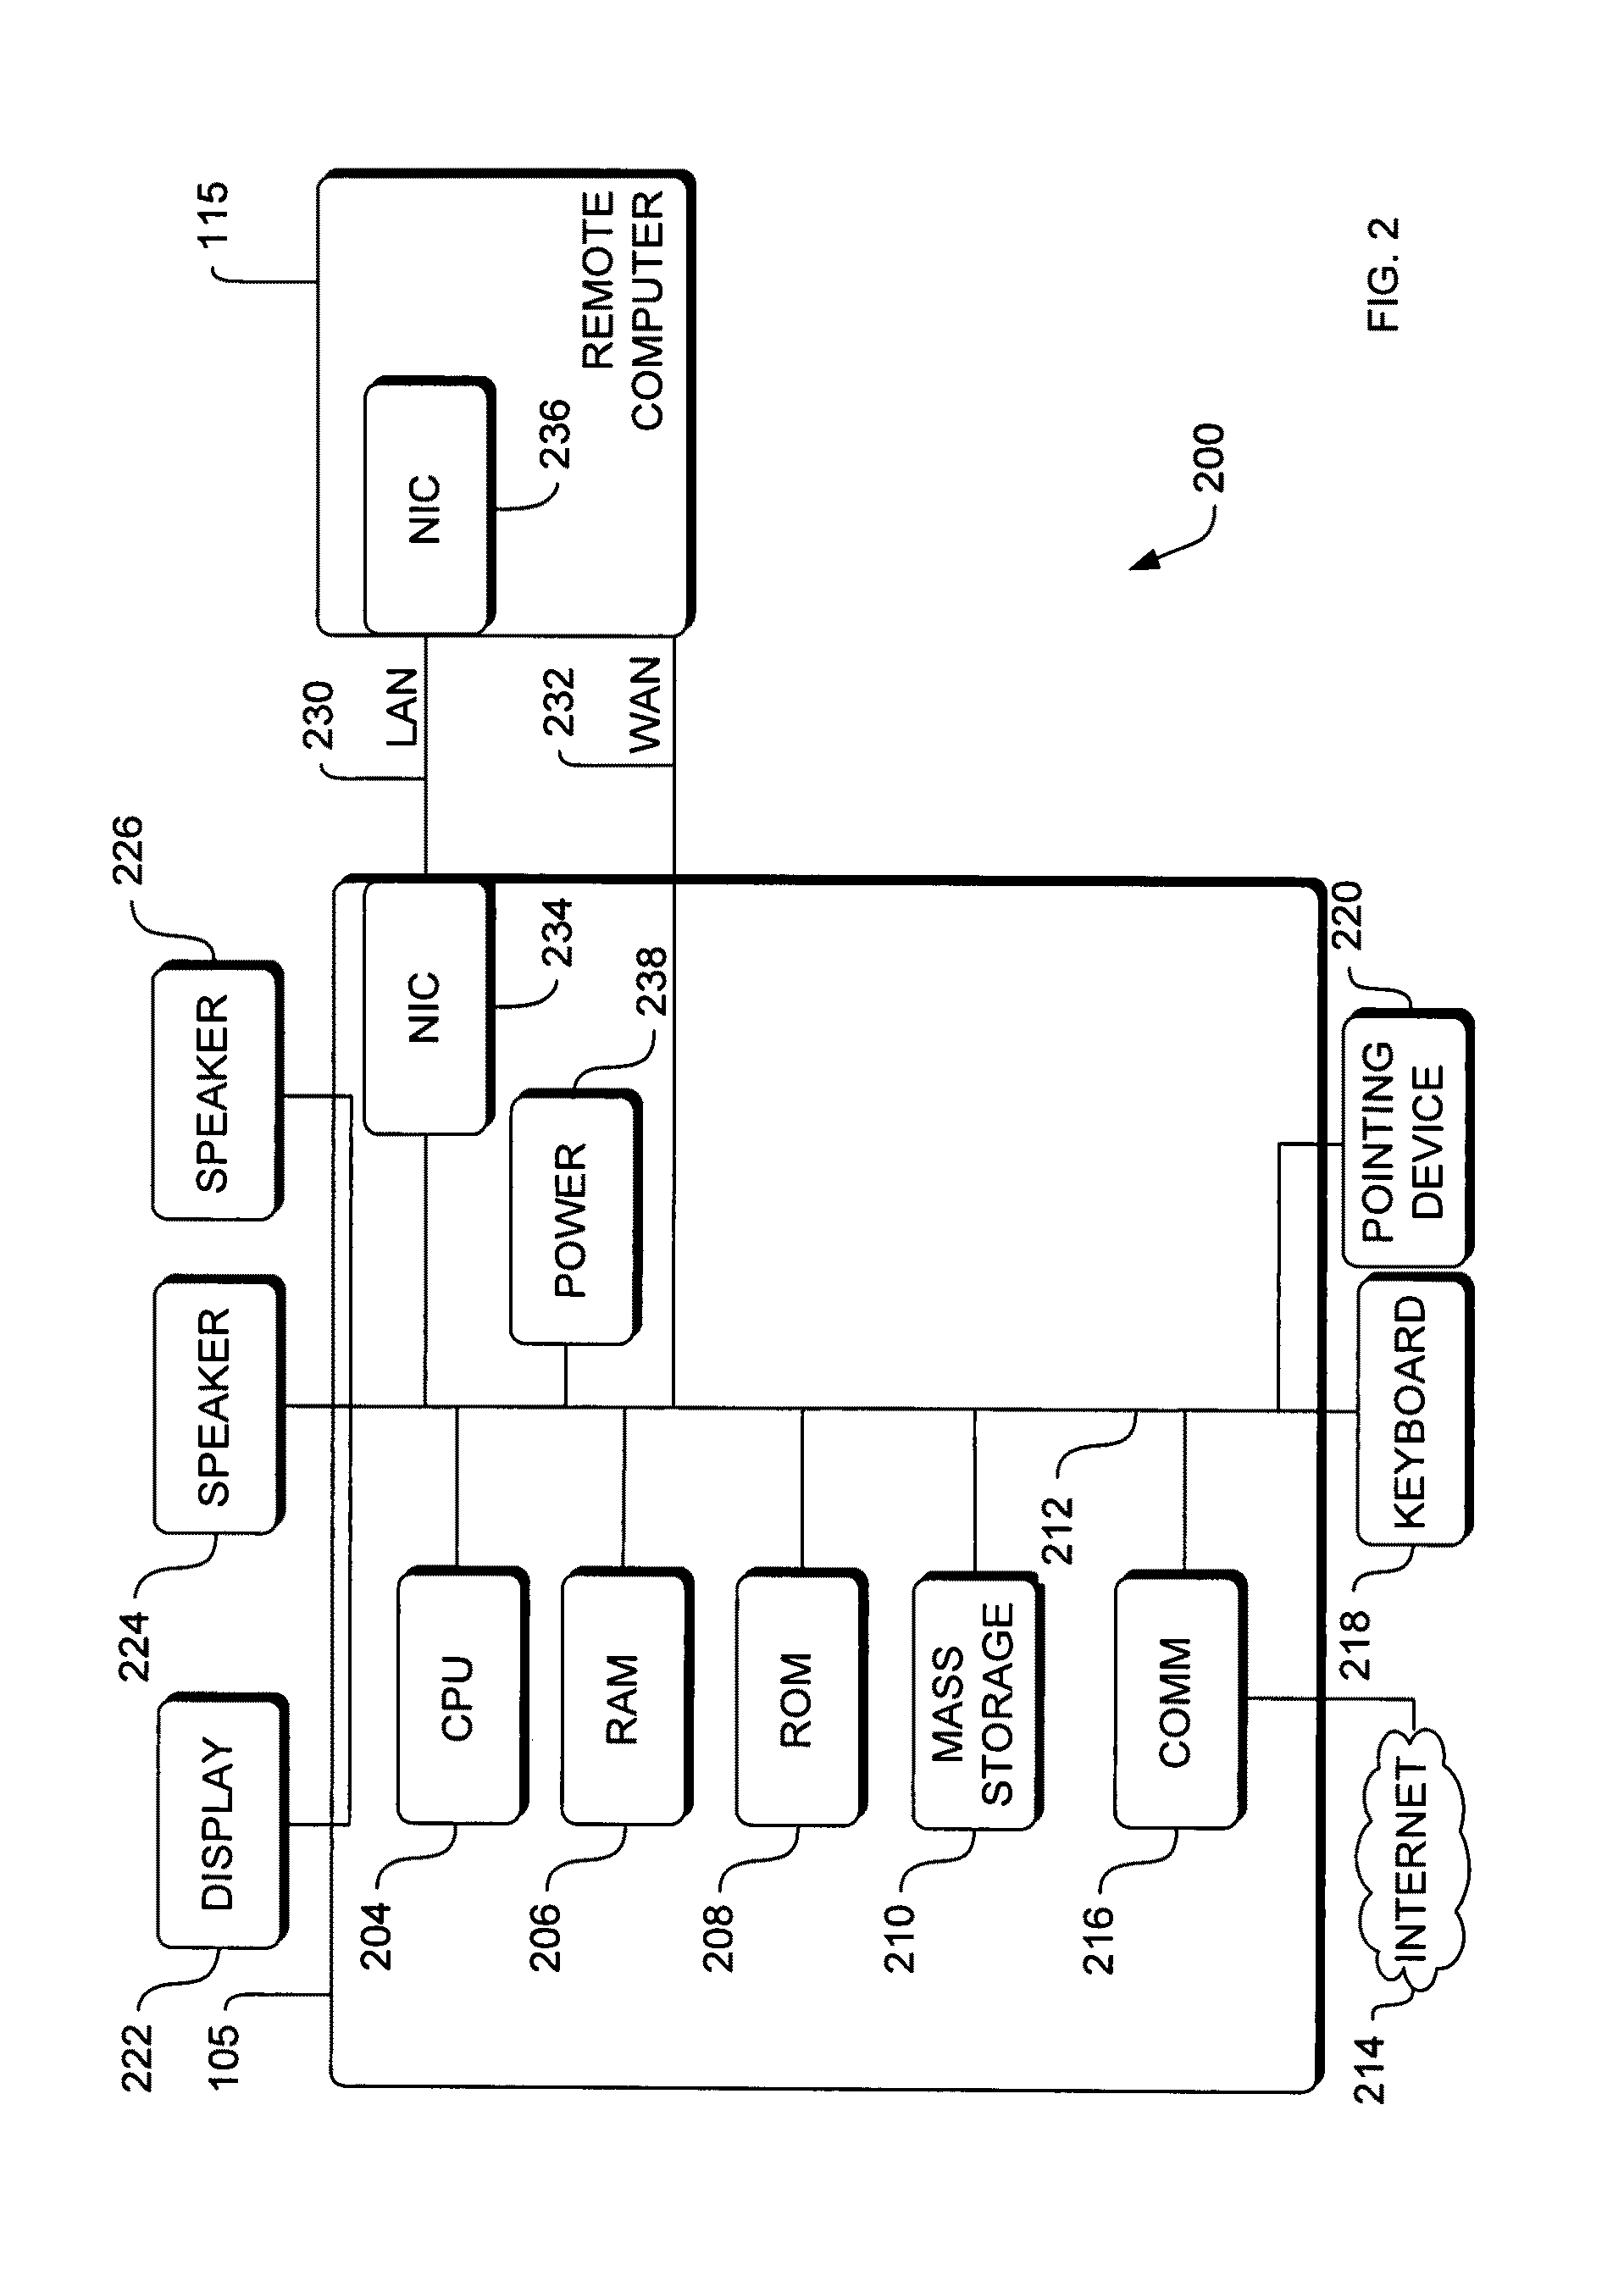 Method and apparatus for account payable matching for an online purchasing system